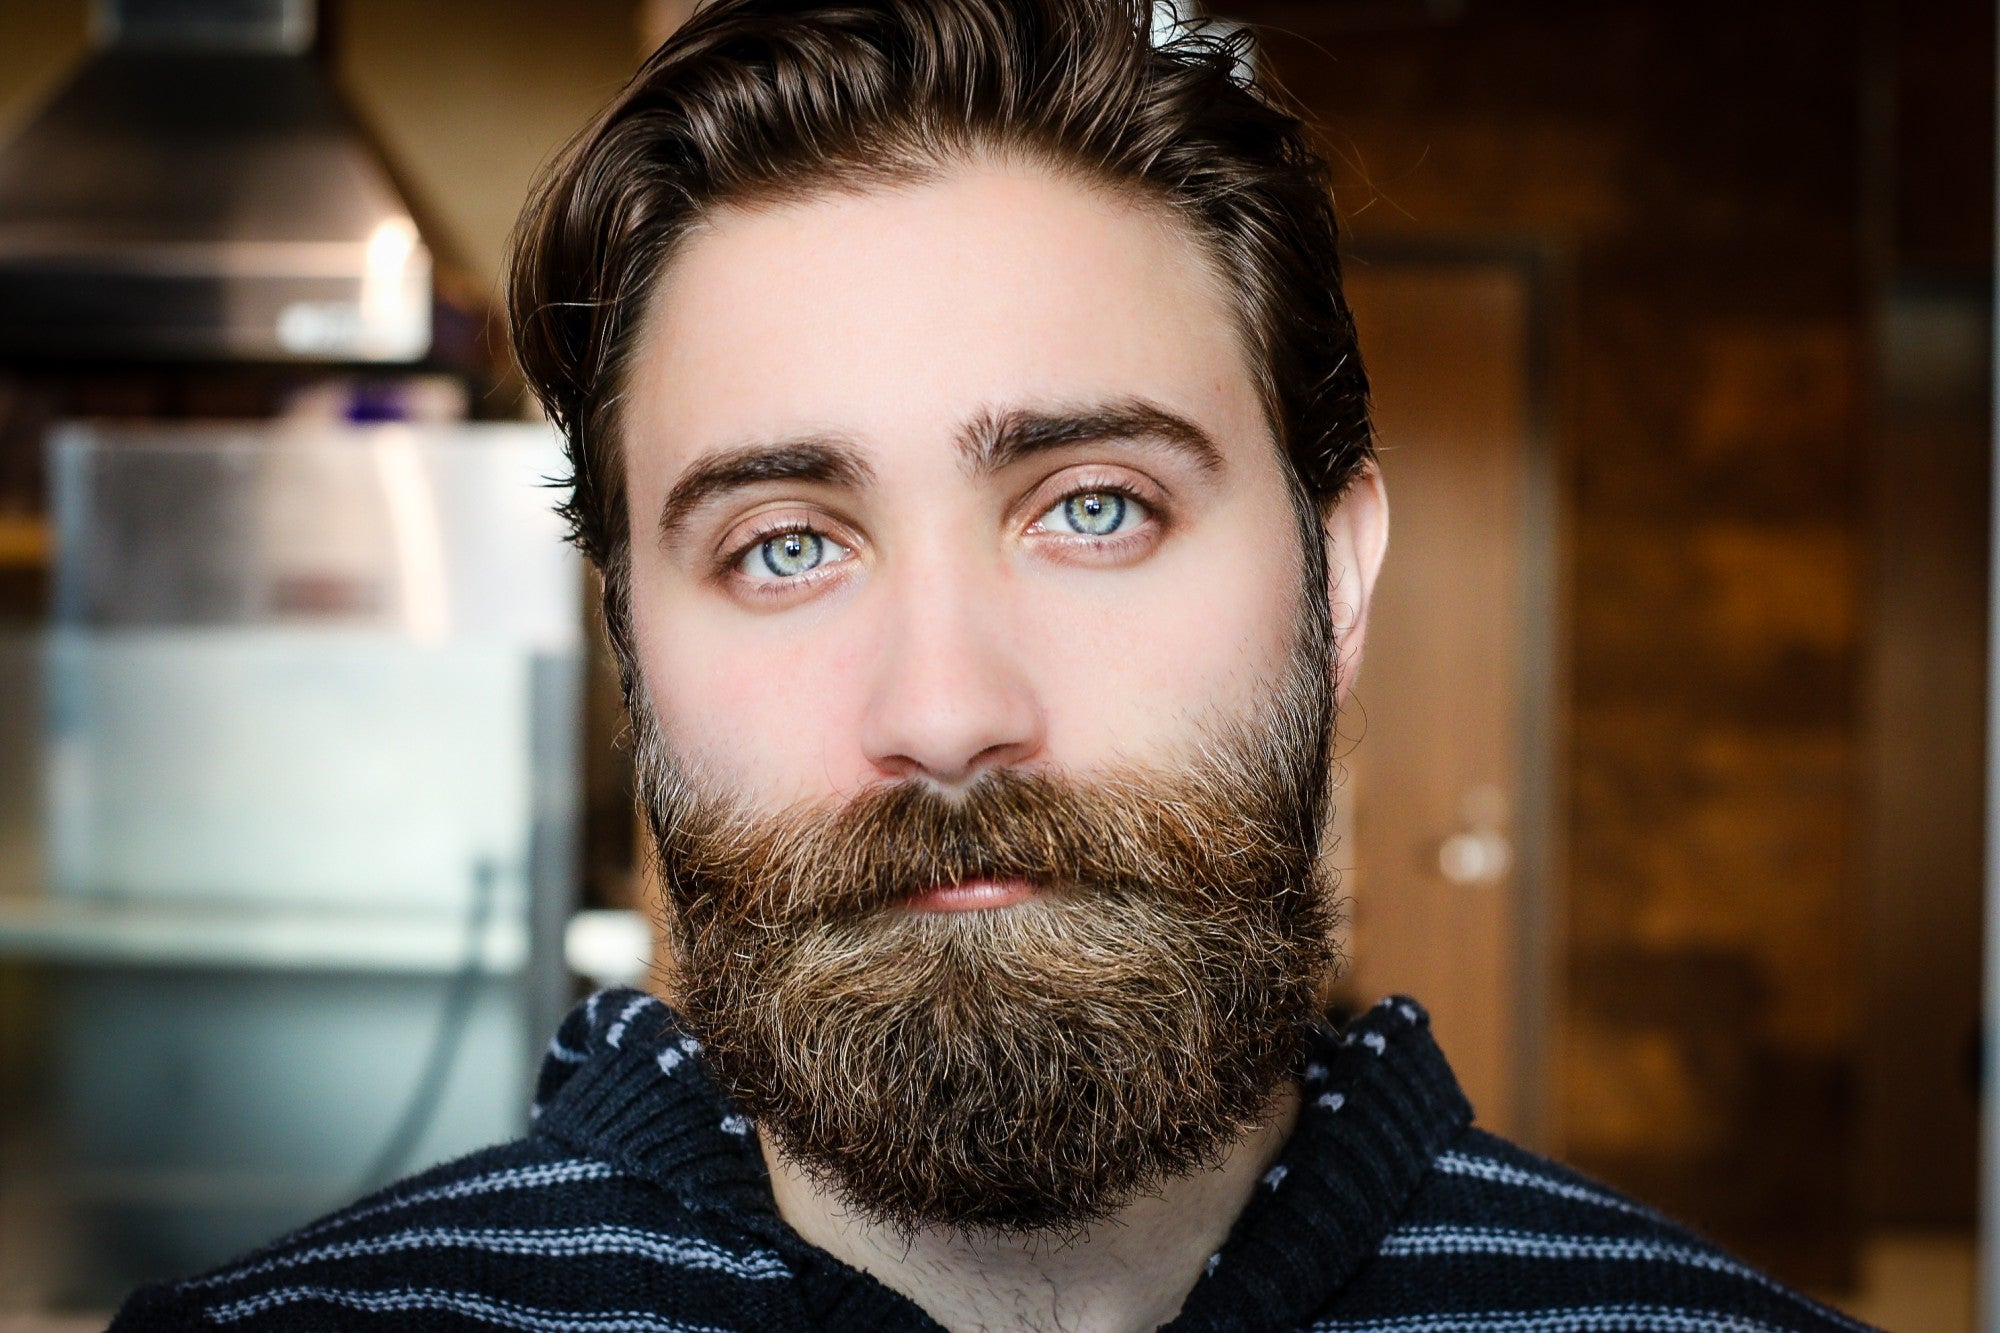 What a Gorgeous Beard! You Must Use the Best Beard Shampoo Ever